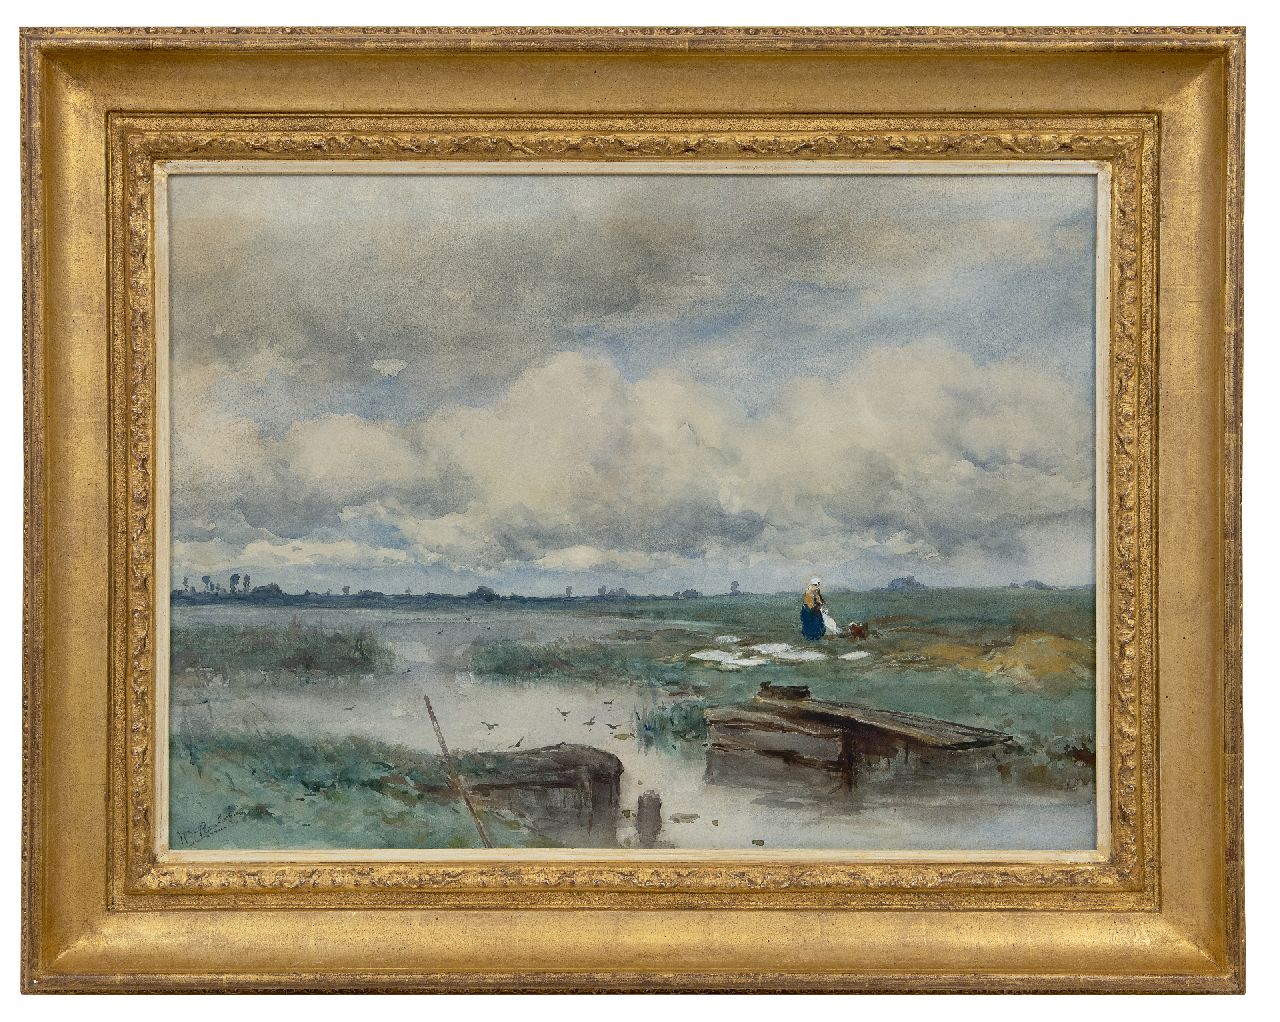 Roelofs W.  | Willem Roelofs | Watercolours and drawings offered for sale | Landschaft mit Bleichfeld, watercolour on paper 51.0 x 70.8 cm, signed l.l. and painted in the 1880's